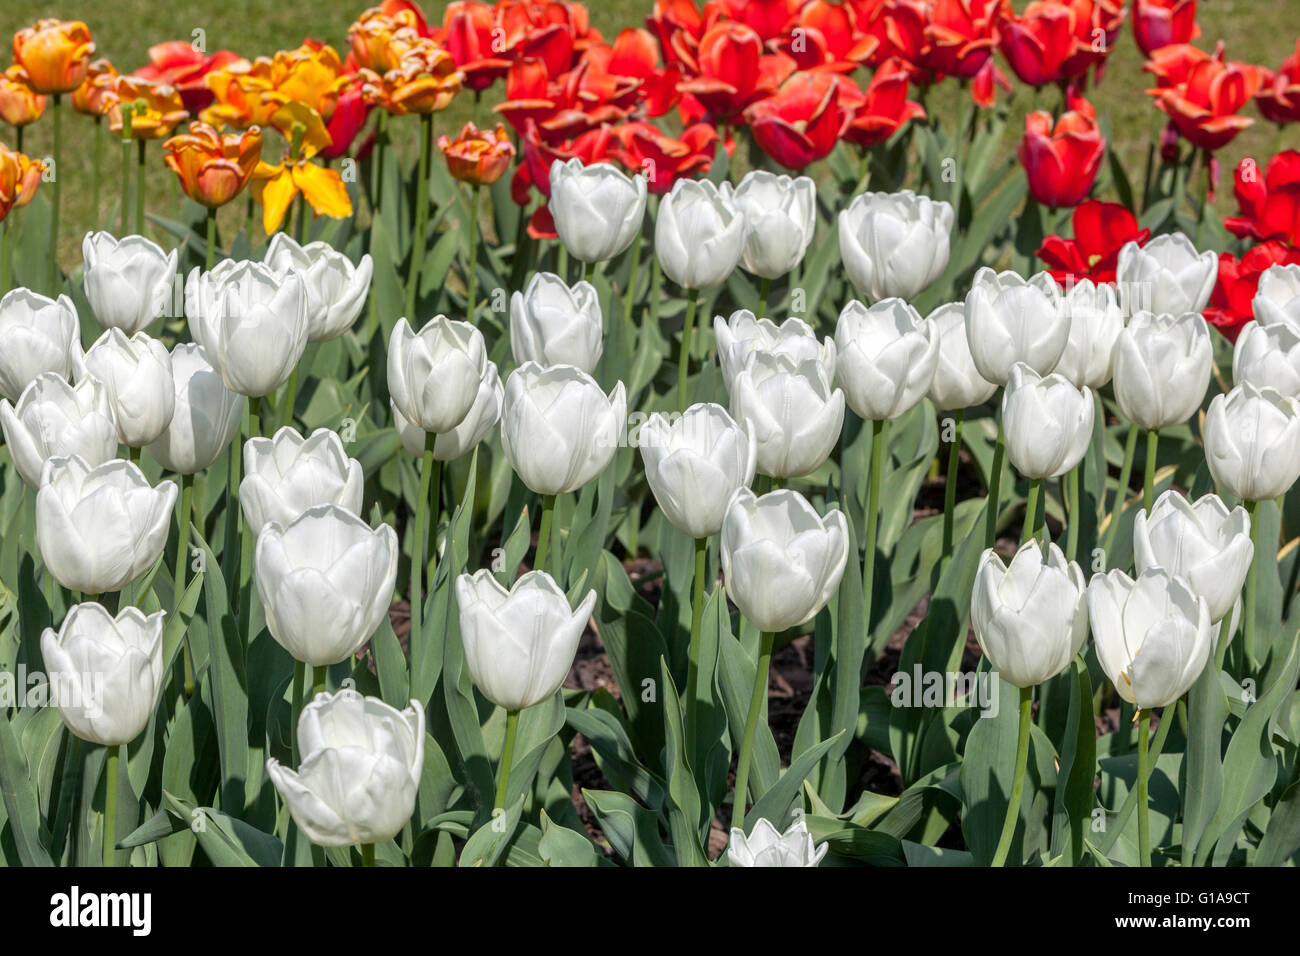 White Tulips Garden Mixed Flowering Tulips Garden White Tulipa 'Hakuun' White flowers Tulips Flower bed Mix May Flowers Blooming Colourful Flowerbed Stock Photo